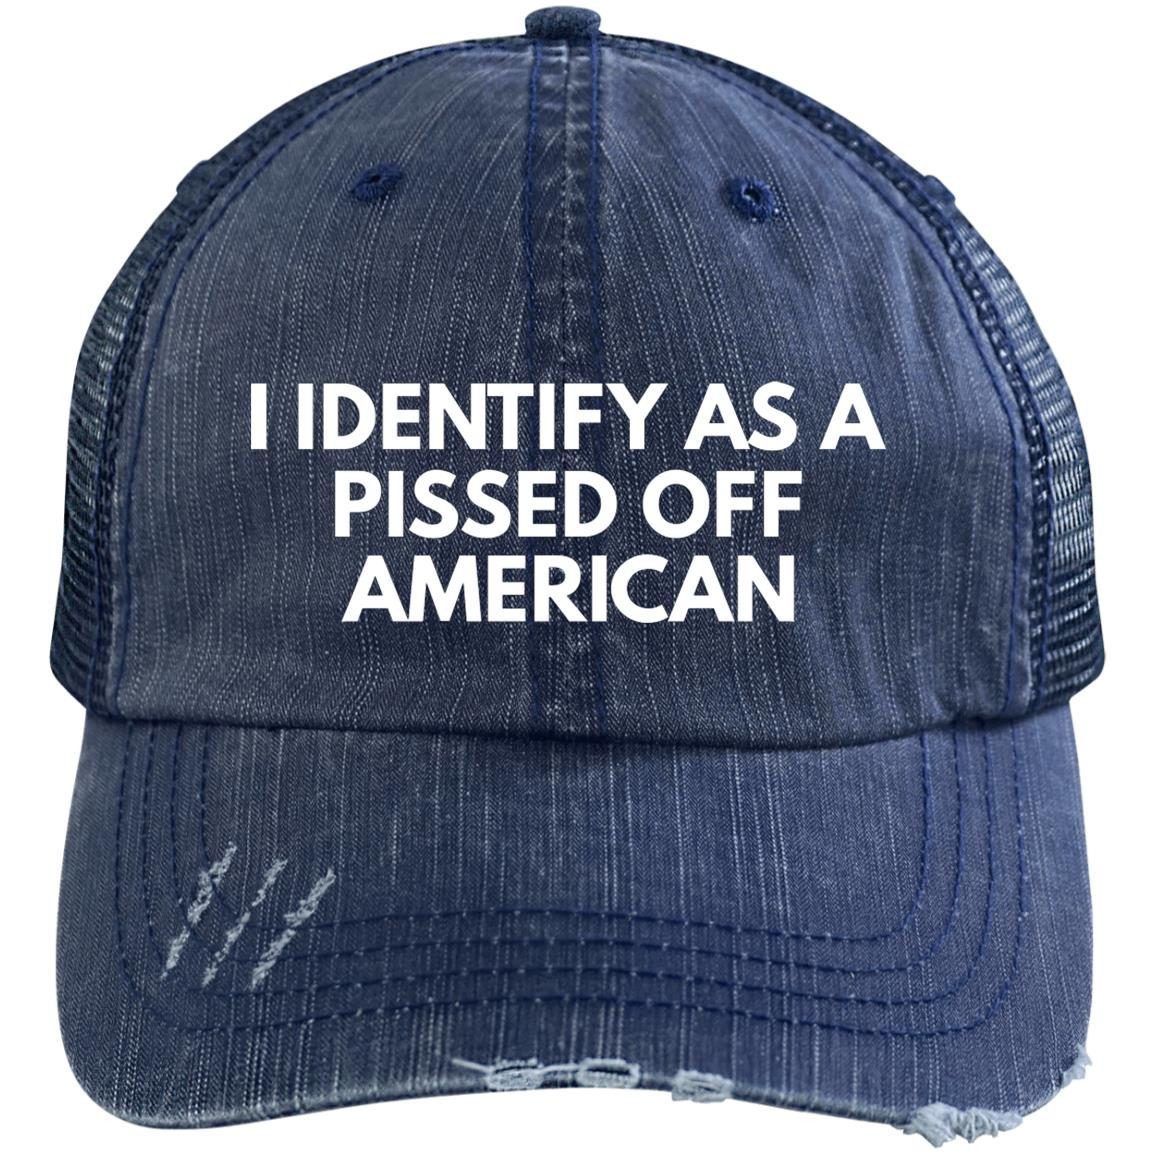 I Identify As A Pissed Off American Embroidered Hat Cap 3